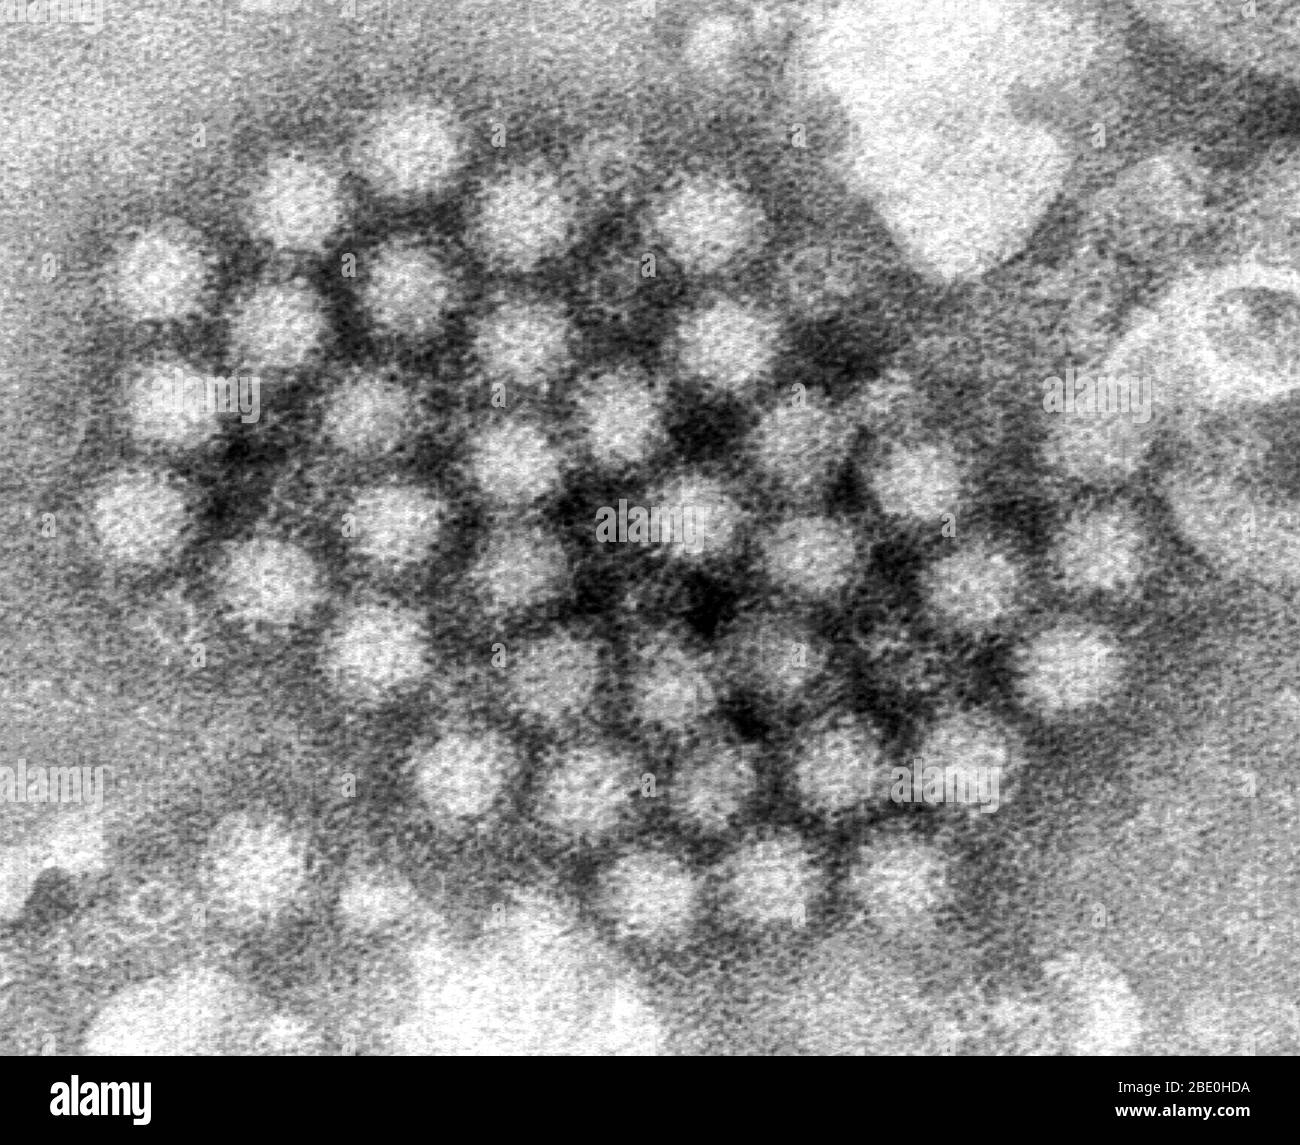 This transmission electron micrograph (TEM) revealed some of the ultrastructural morphology displayed by norovirus virions, or virus particles. Noroviruses belong to the genus Norovirus, and the family Caliciviridae. They are a group of related, single-stranded RNA, nonenveloped viruses that cause acute gastroenteritis in humans. Norovirus was recently approved as the official genus name for the group of viruses provisionally described as Norwalk-like viruses (NLV). Stock Photo